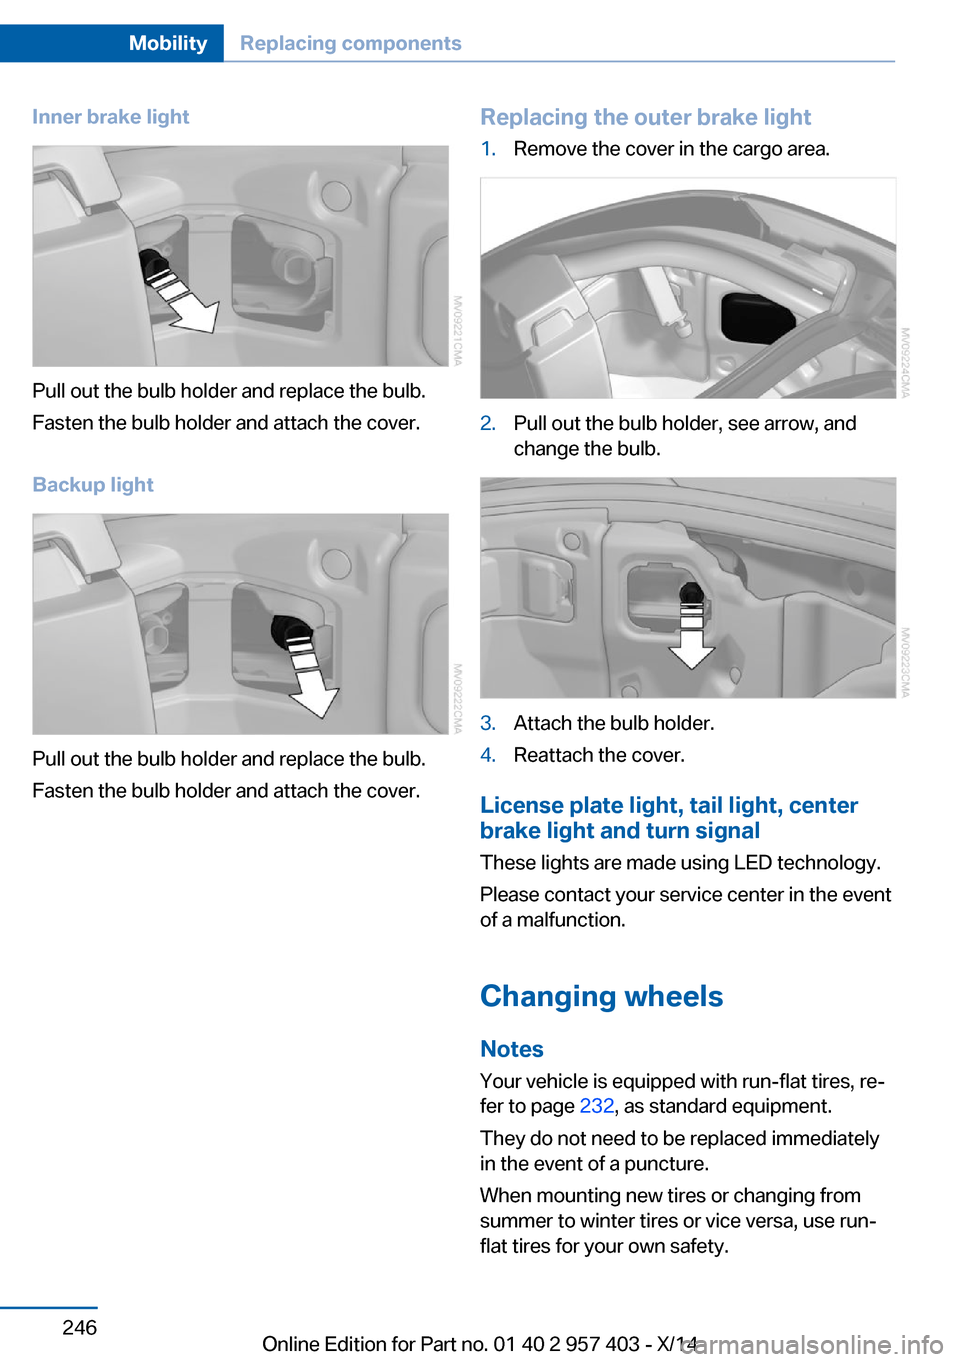 BMW Z4 2014 E89 Owners Manual Inner brake light
Pull out the bulb holder and replace the bulb.
Fasten the bulb holder and attach the cover.
Backup light
Pull out the bulb holder and replace the bulb.
Fasten the bulb holder and att